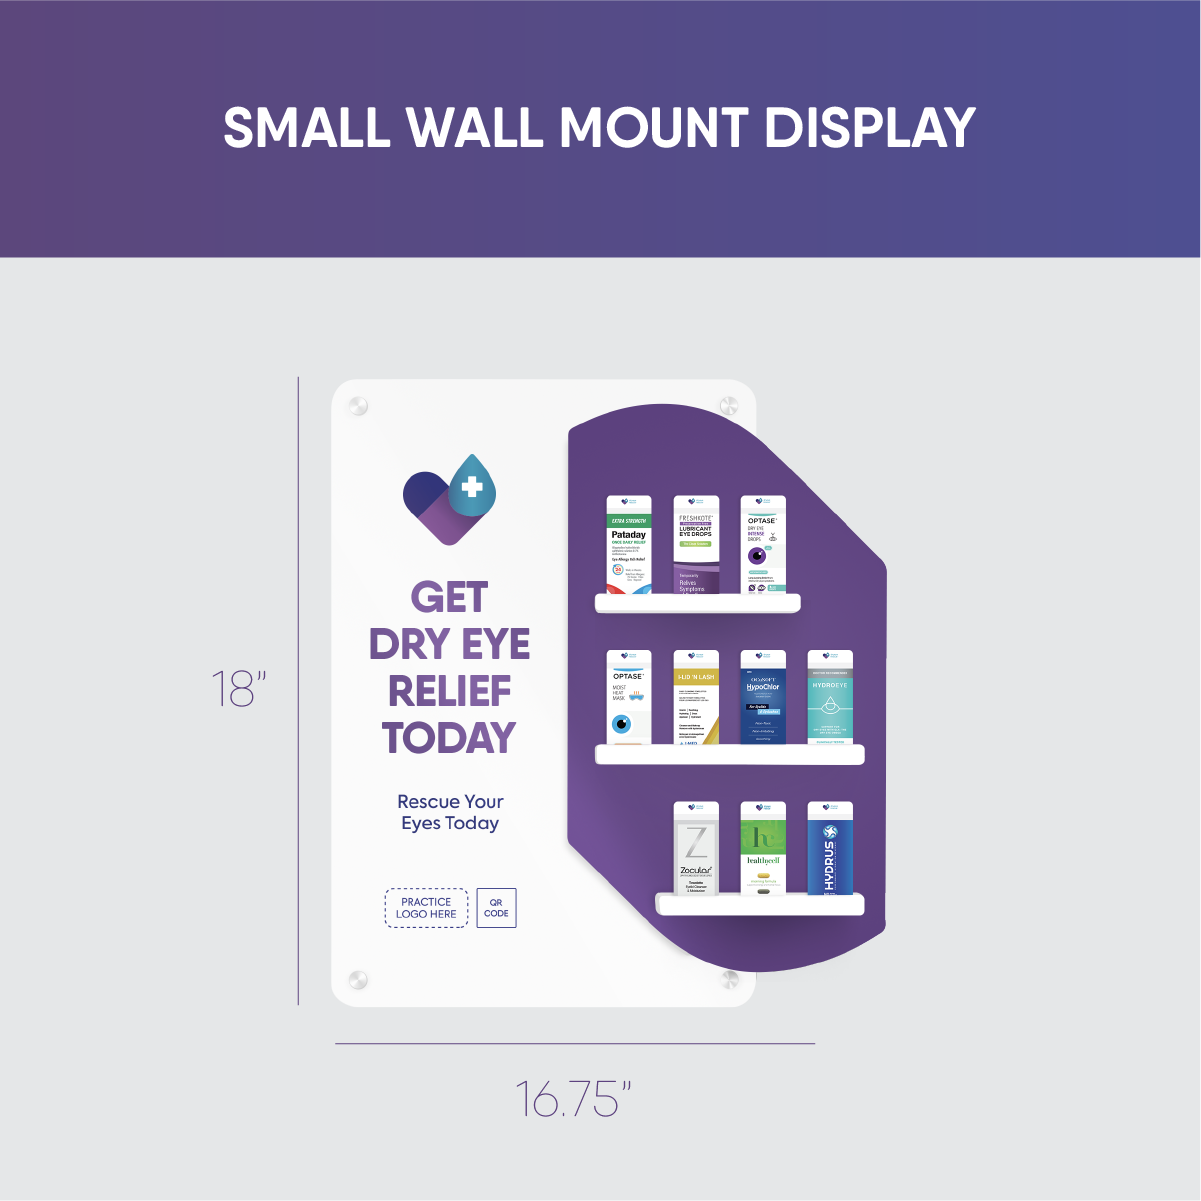 Package D (Exam Room x 2 + Countertop + Hybrid Display + Marketing Materials)